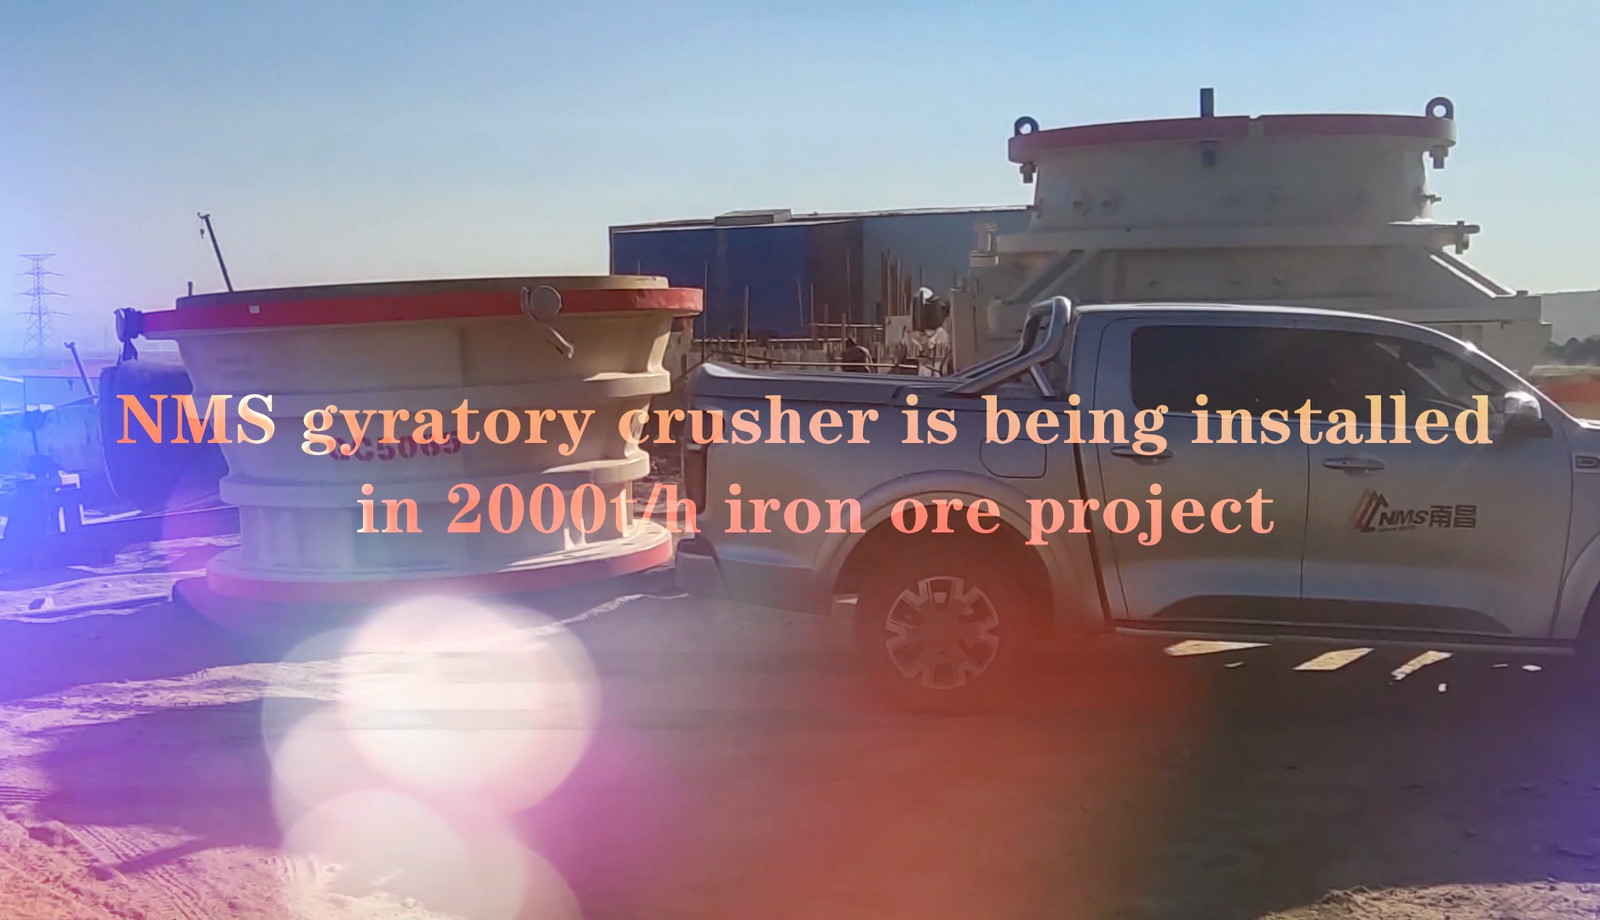 NMS gyratory crusher is being installed in 2000t/h iron ore project